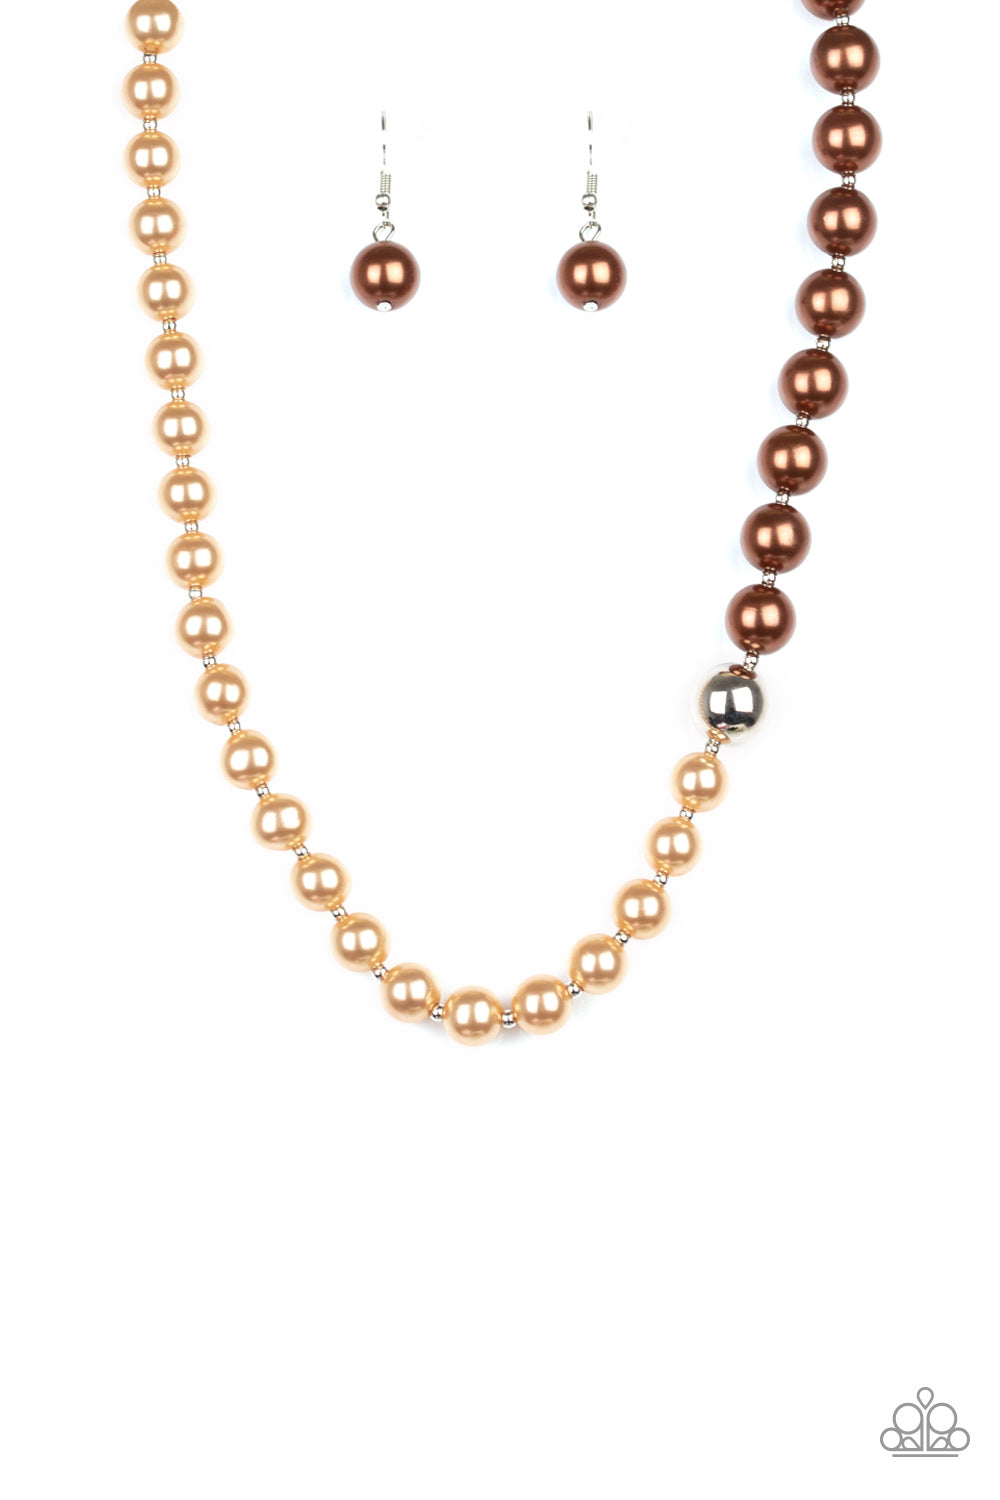 Separated by dainty silver beads, golden brown pearls merge into dark brown pearls for a contemporary look. Infused with a shiny silver bead, the timeless pearls collect below the collar for a refined asymmetrical look. Features an adjustable clasp closure.